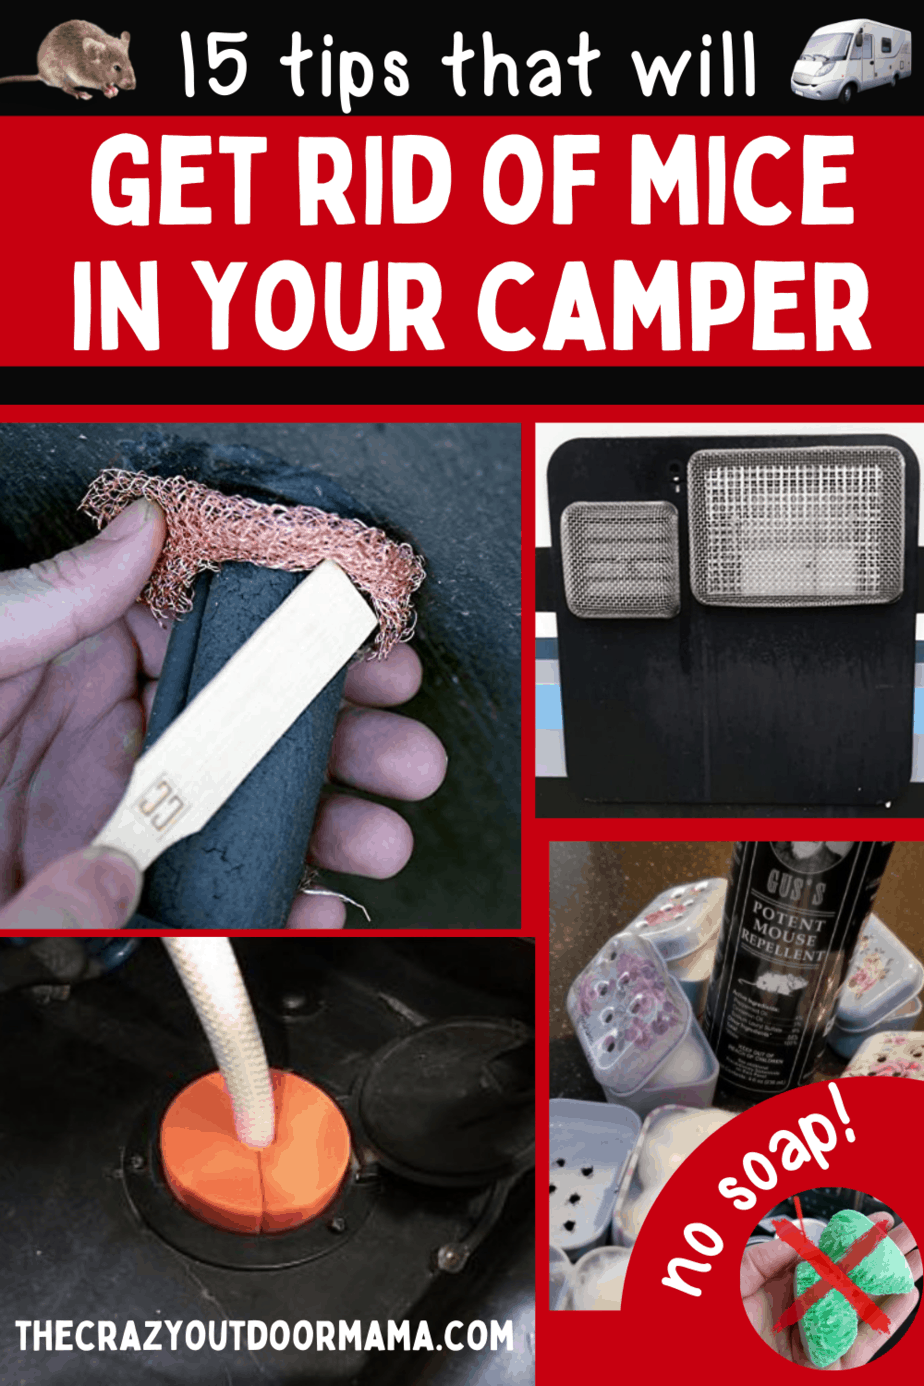 https://www.thecrazyoutdoormama.com/wp-content/uploads/2021/08/how-to-get-rid-of-mice-in-camper.png